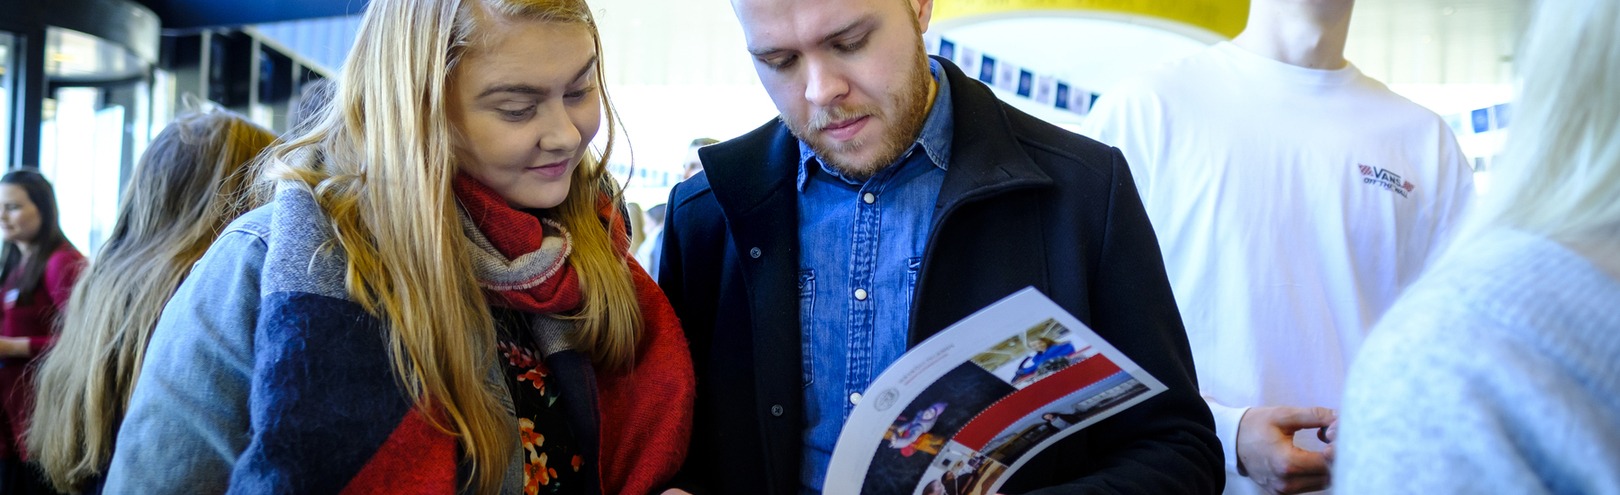 Talk to students and teachers at the Digital University Day  - Available at University of Iceland